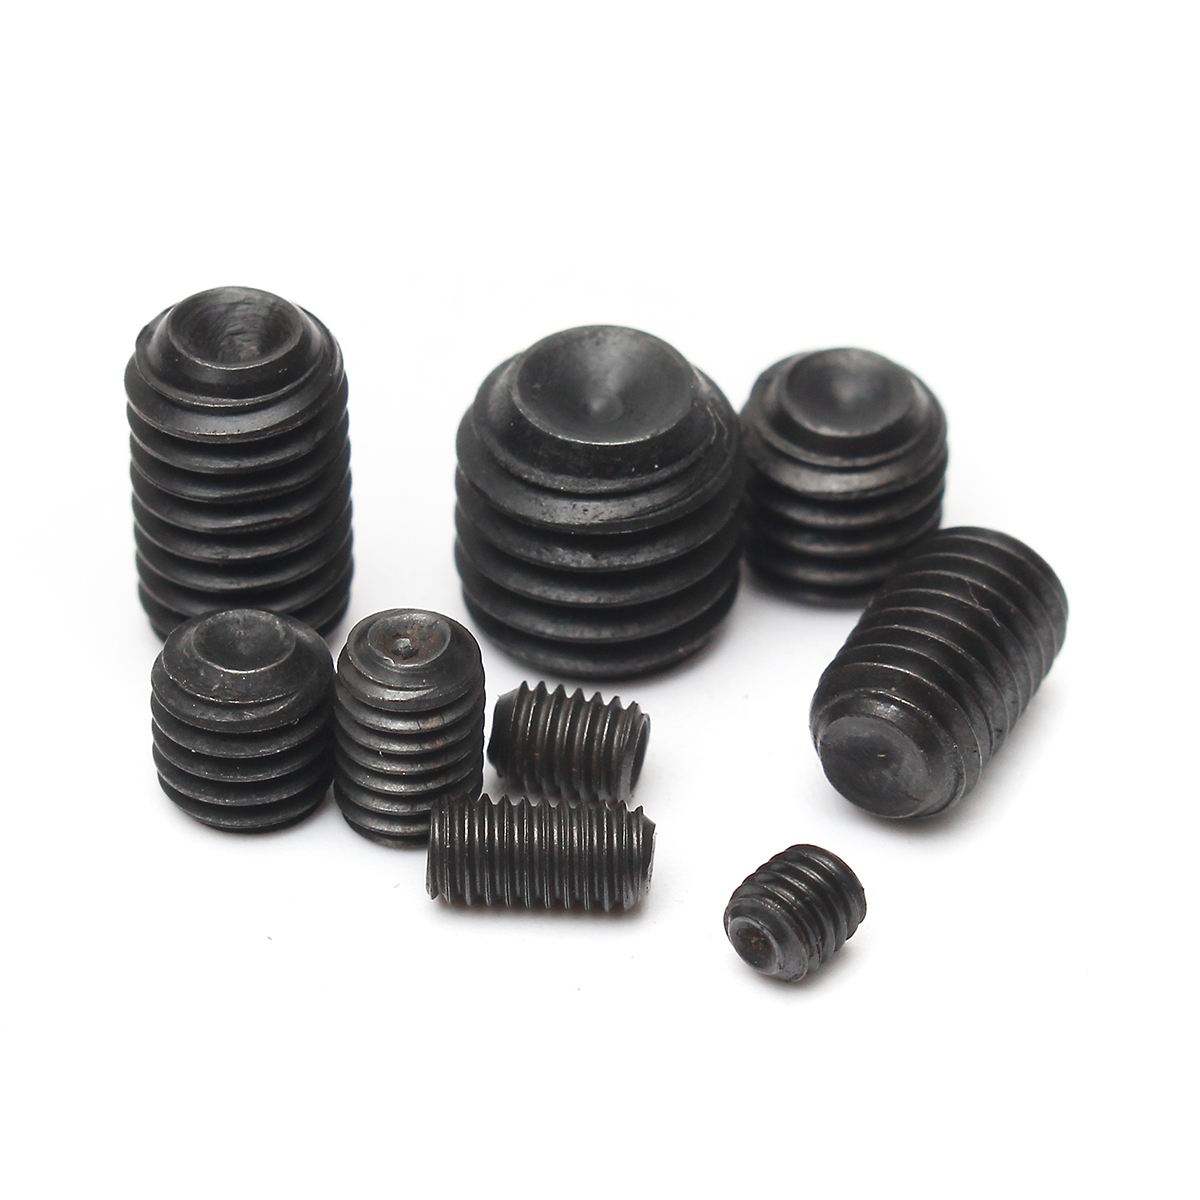 Sulevetrade-MXAS1-250Pcs-Head-Socket-Hex-Set-Grub-Screw-Cup-Point-Alloy-Steel-Assortment-With-Case-1129439-6